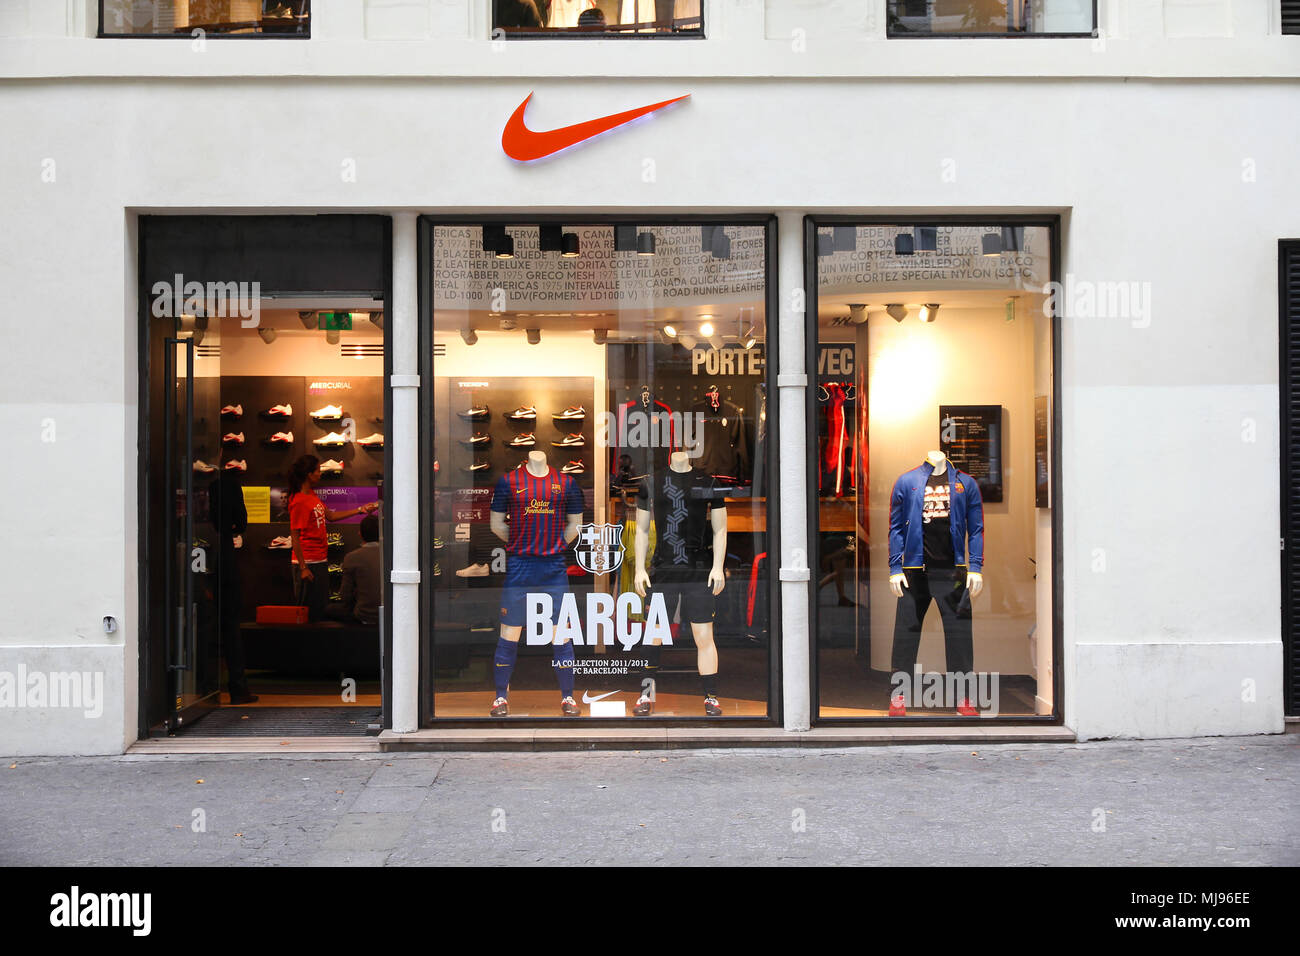 PARIS - JULY 20: Nike store on July 20, 2011 in Paris, France. Nike is one  of most recognized sports fashion brands worldwide. It exists since 1964 an  Stock Photo - Alamy